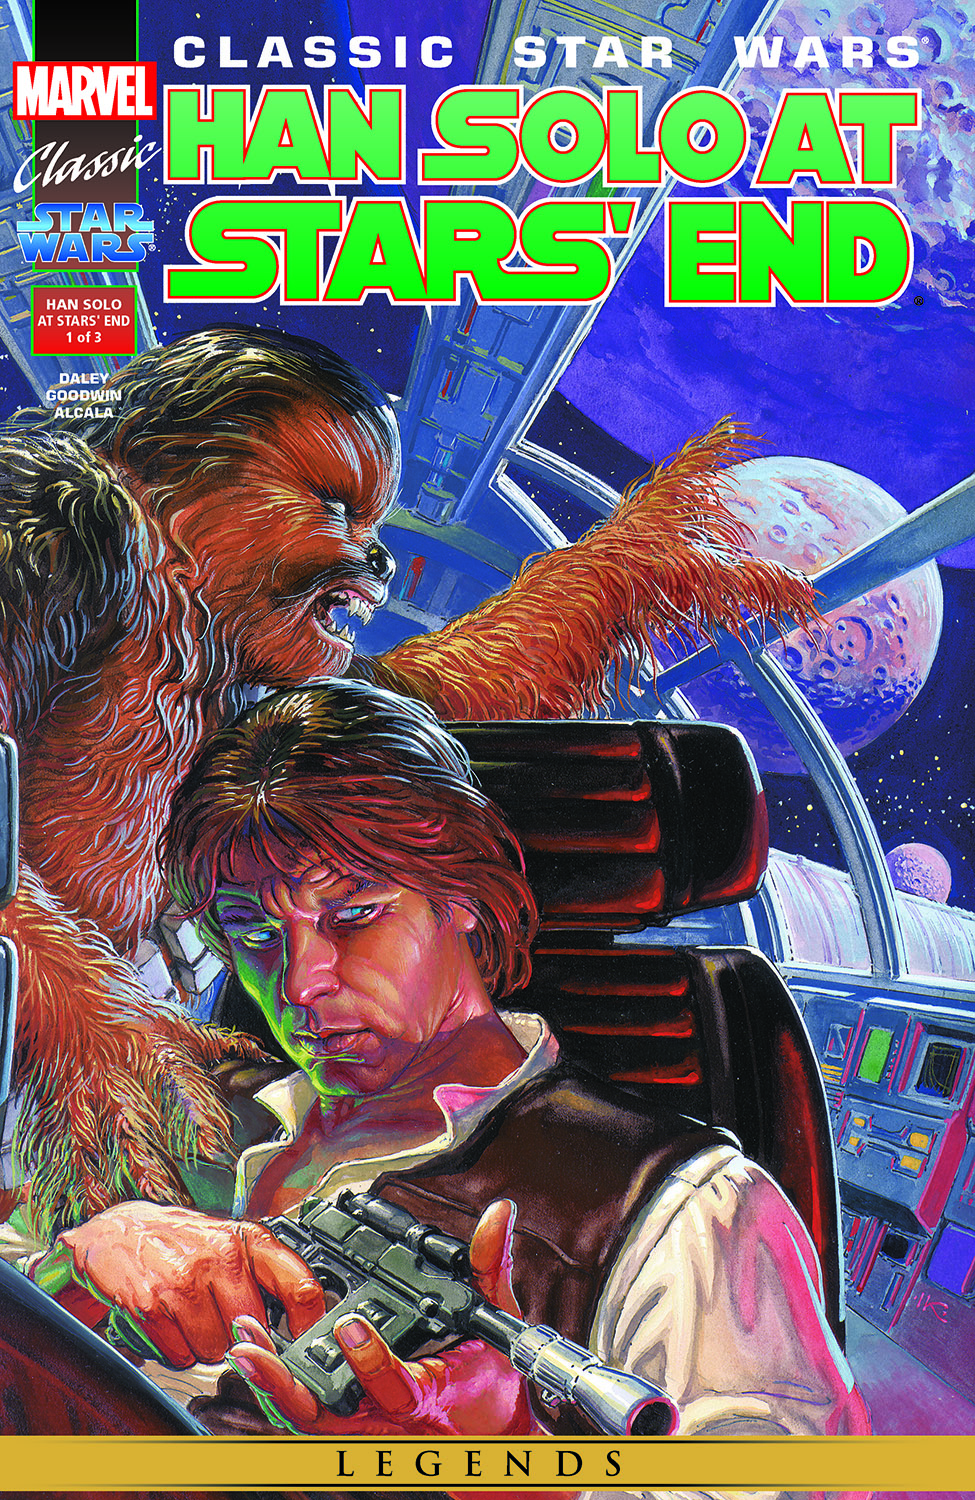 Classic Star Wars: Han Solo at Stars' End (1997) #1